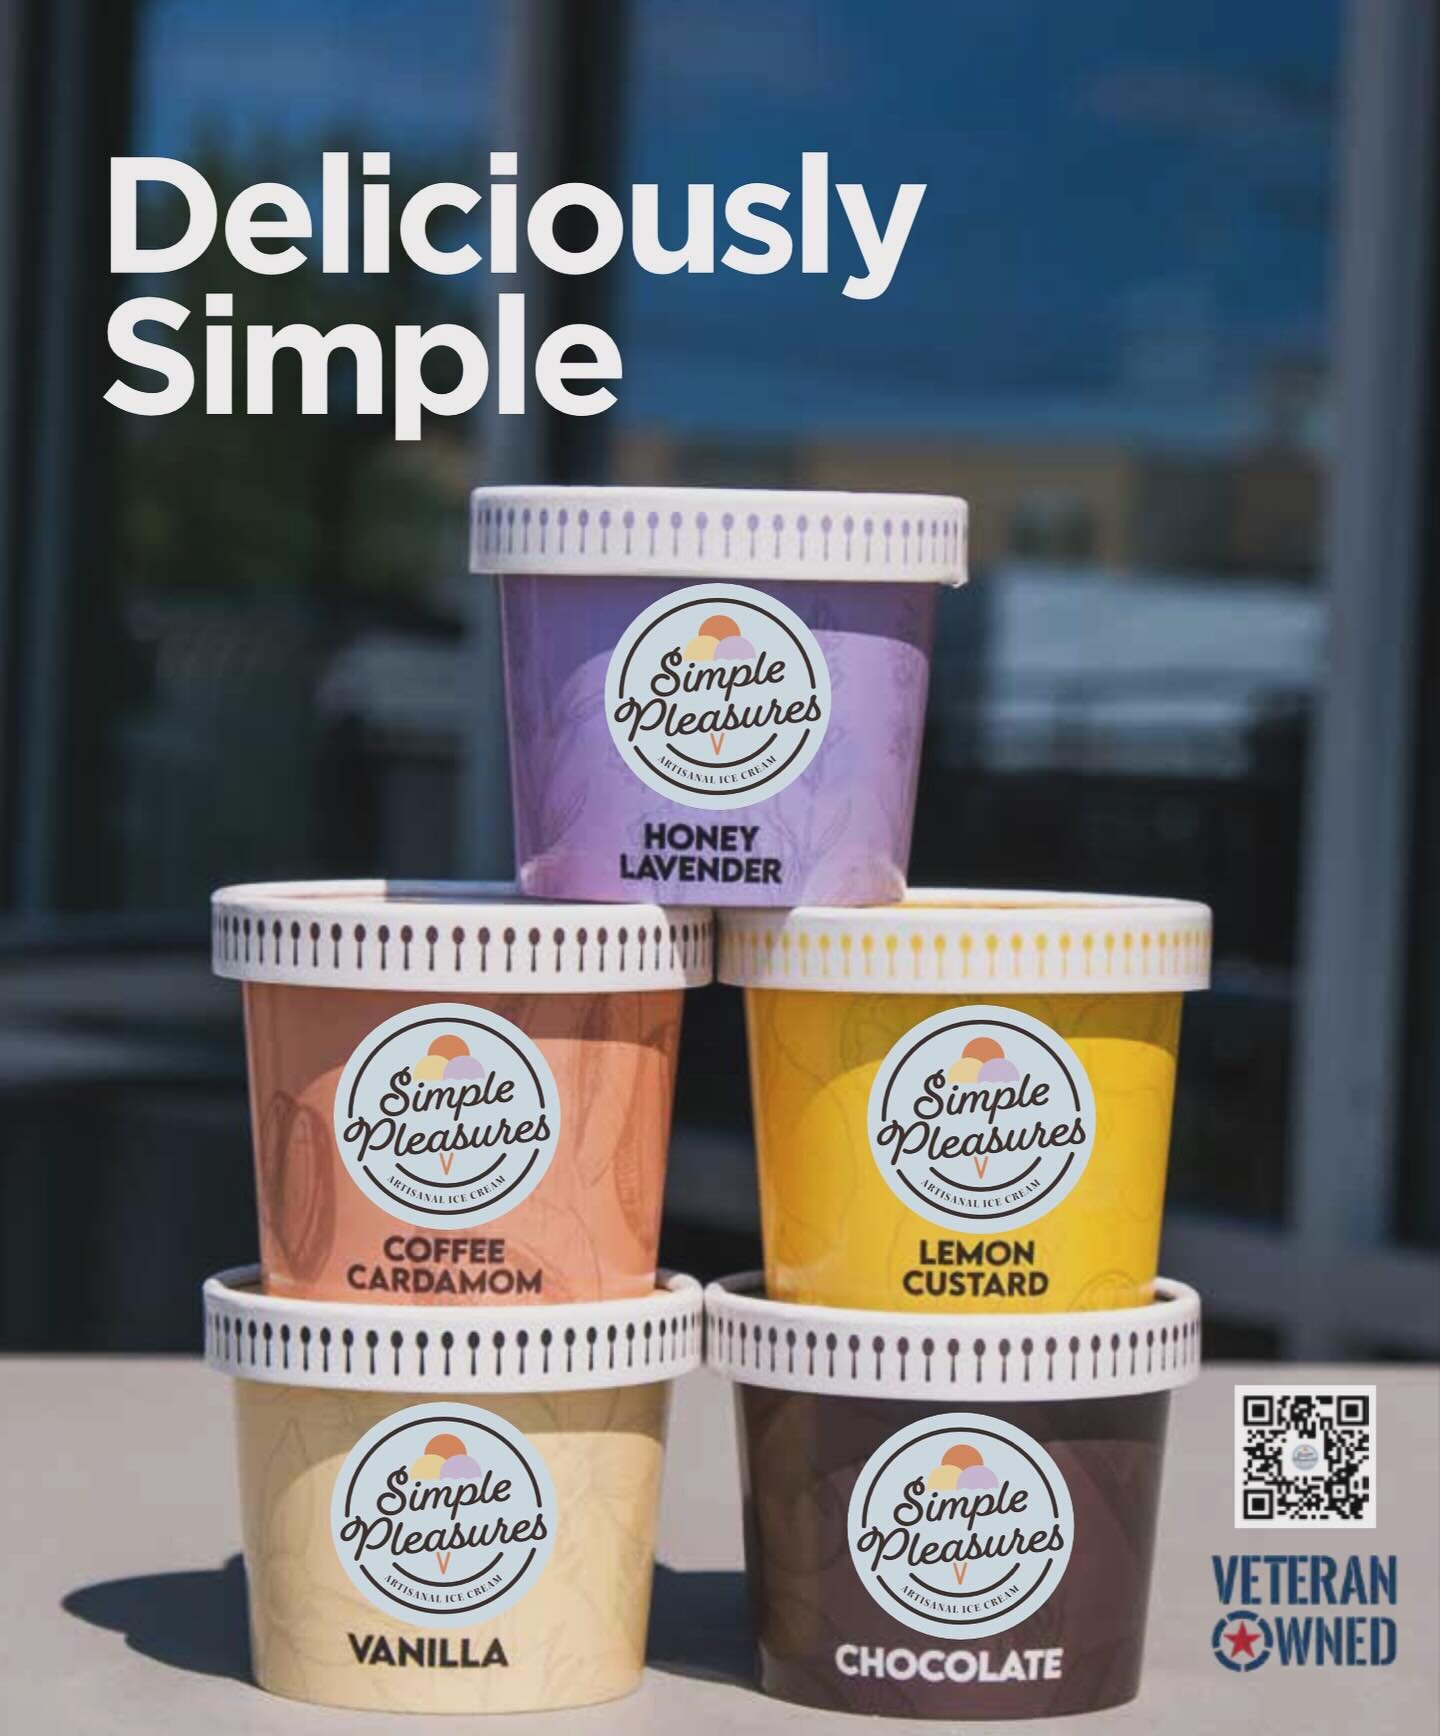 No #aprilfools here! Just an amazingly tasty partner of the month! 

Introducing @simplepleasuresicecream! 

Go ahead and indulge in their creamy, flavorful ice creams that promisesto elevate any day in the office! 

Want to bring the joy of Simple P